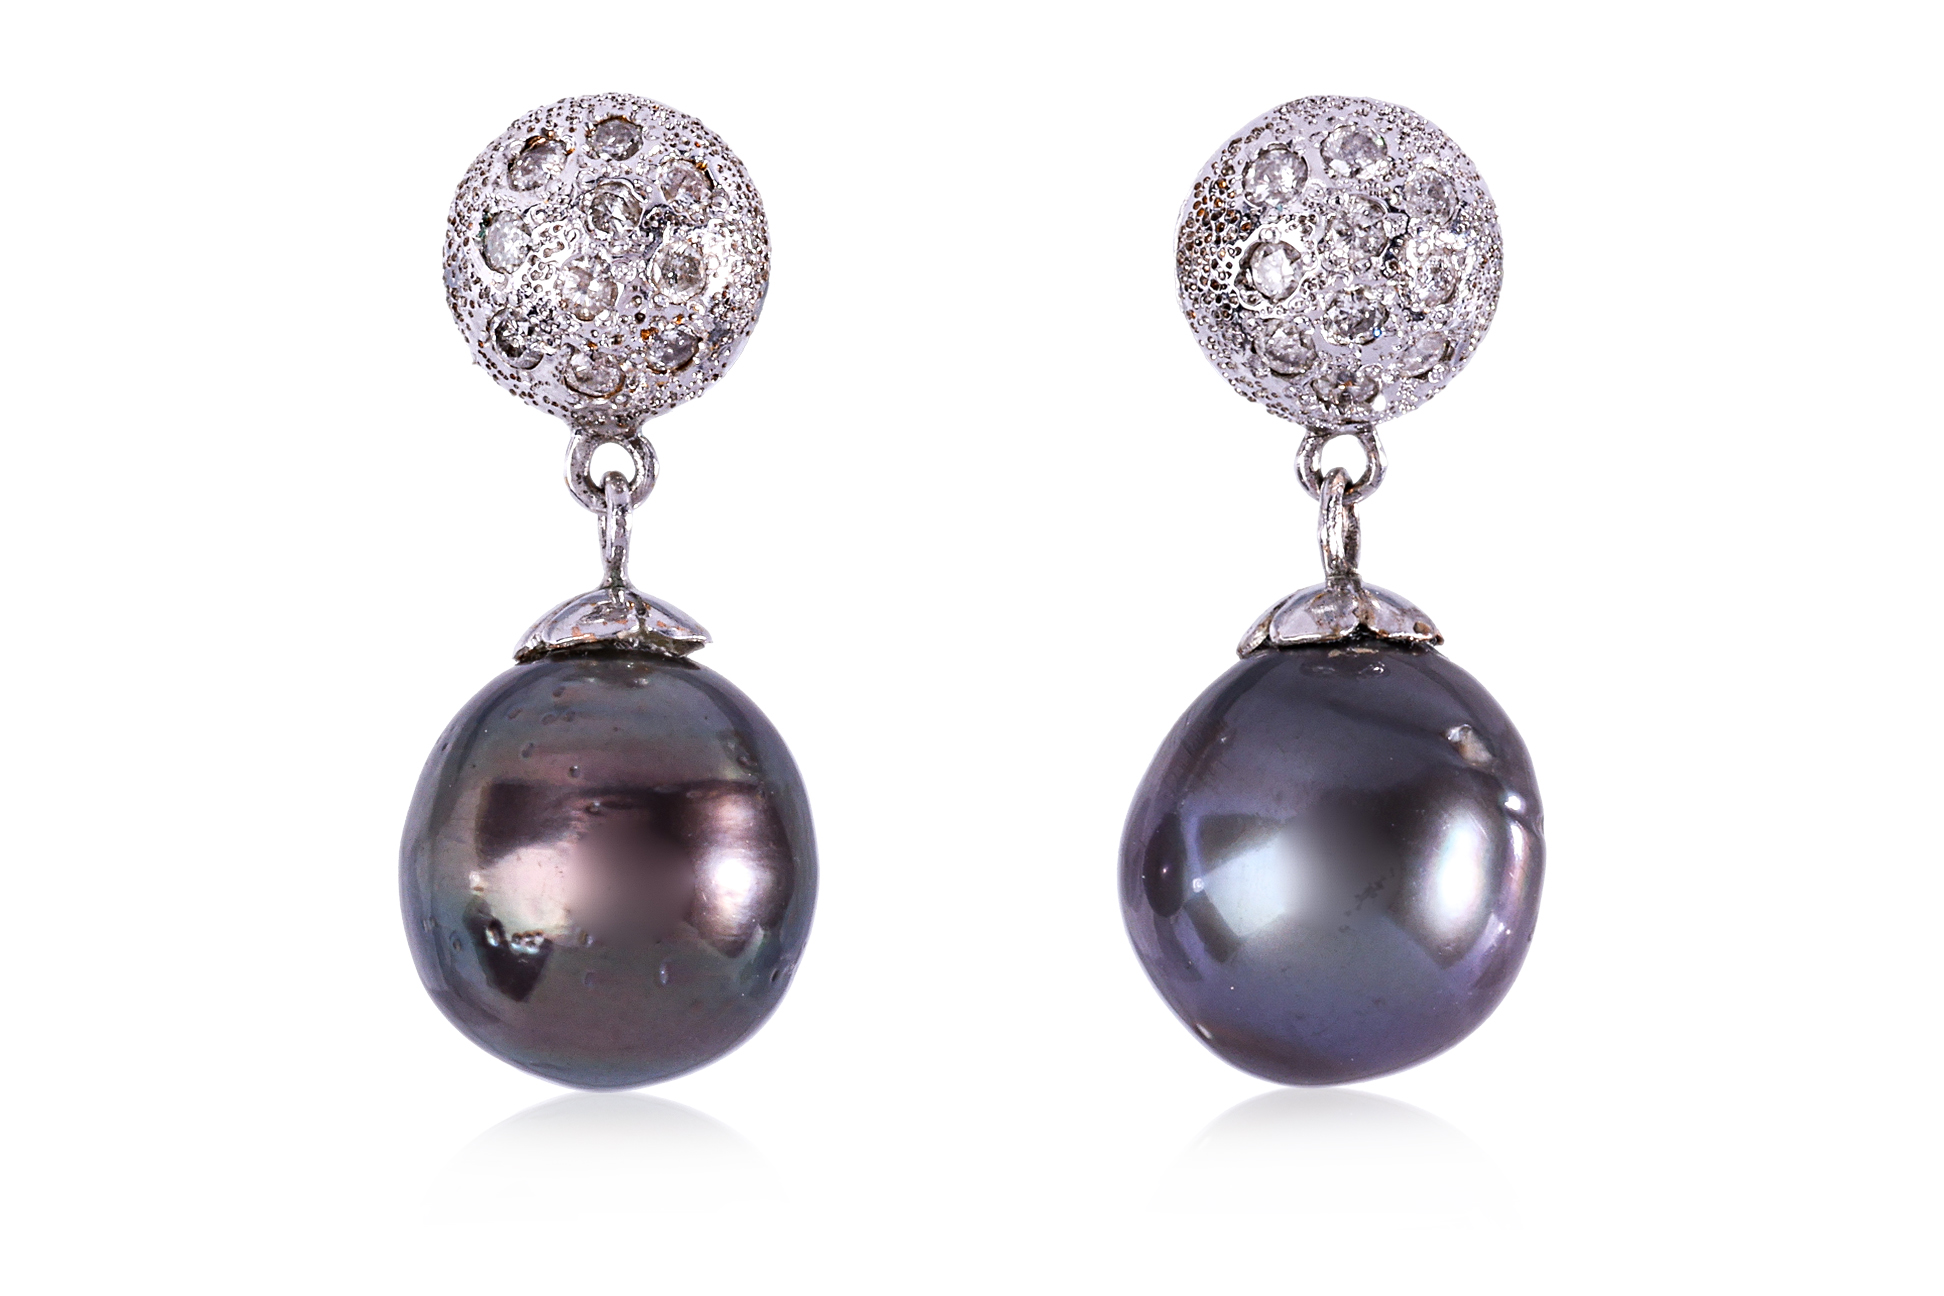 A SET OF TAHITIAN CULTURED PEARL JEWELLERY - Image 4 of 5